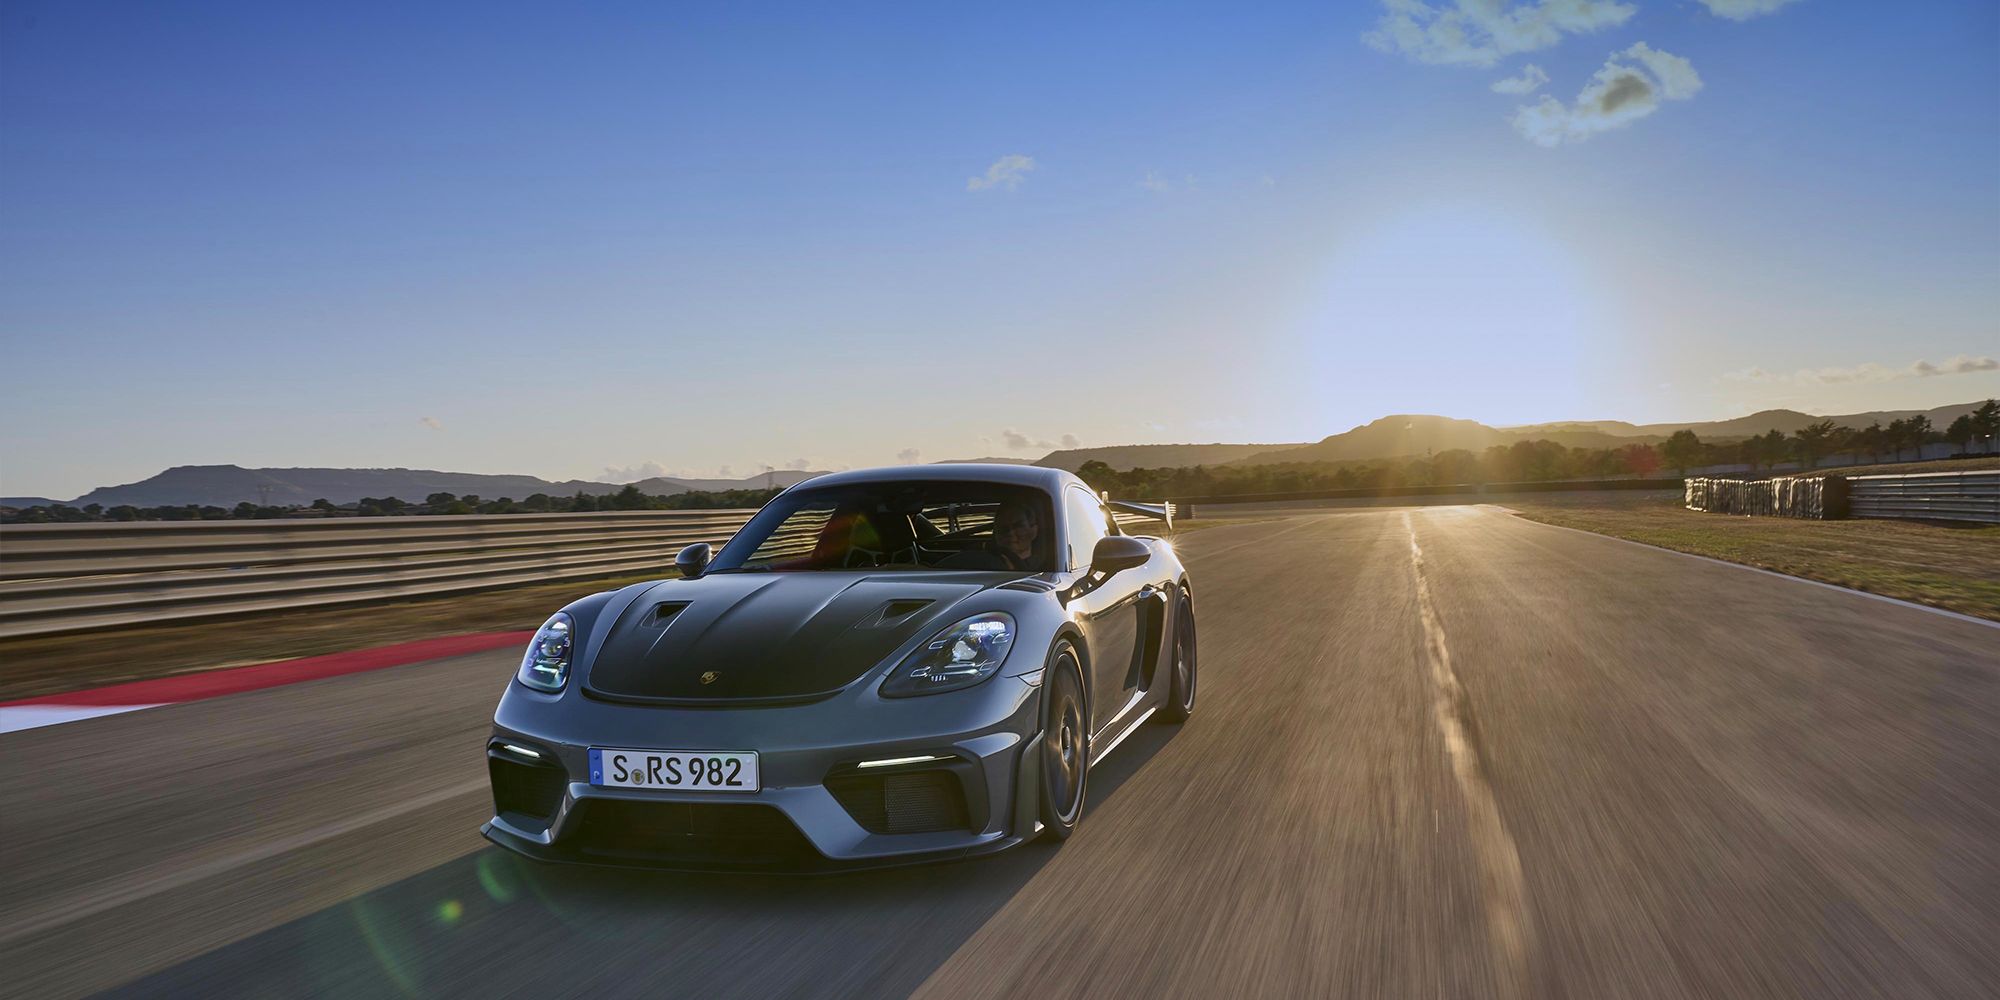 The front of the Cayman GT4 RS on the move